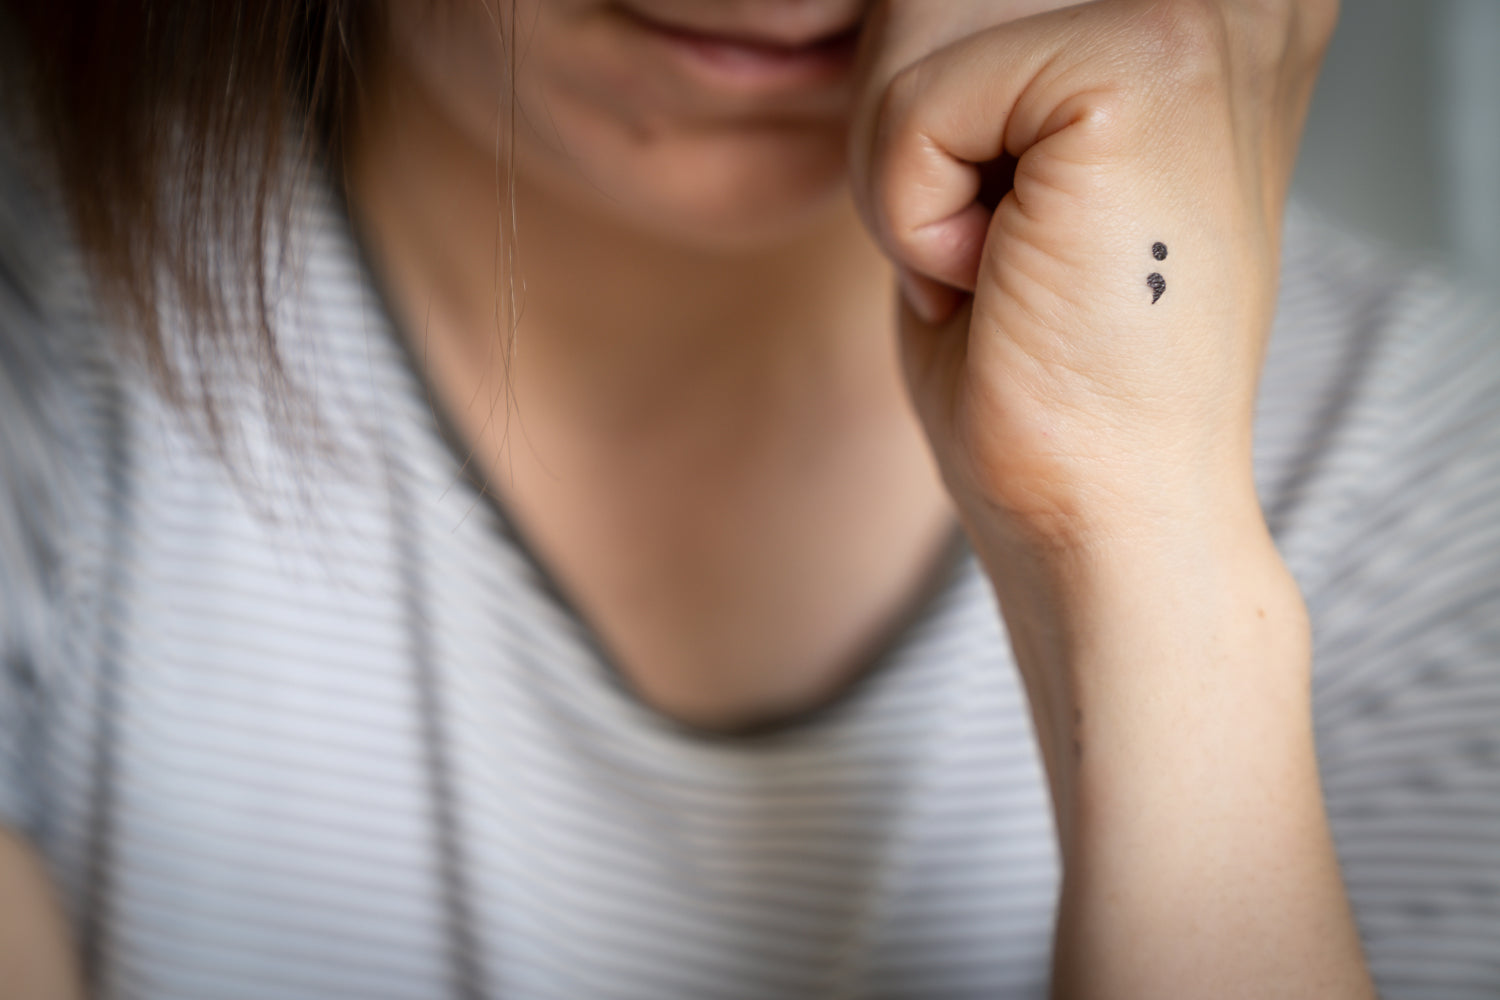 Fun Express Mental Health Awareness Semicolon Temporary Tattoos  Apparel  Accessories  72 Pieces  Buy Online at Best Price in KSA  Souq is now  Amazonsa Beauty